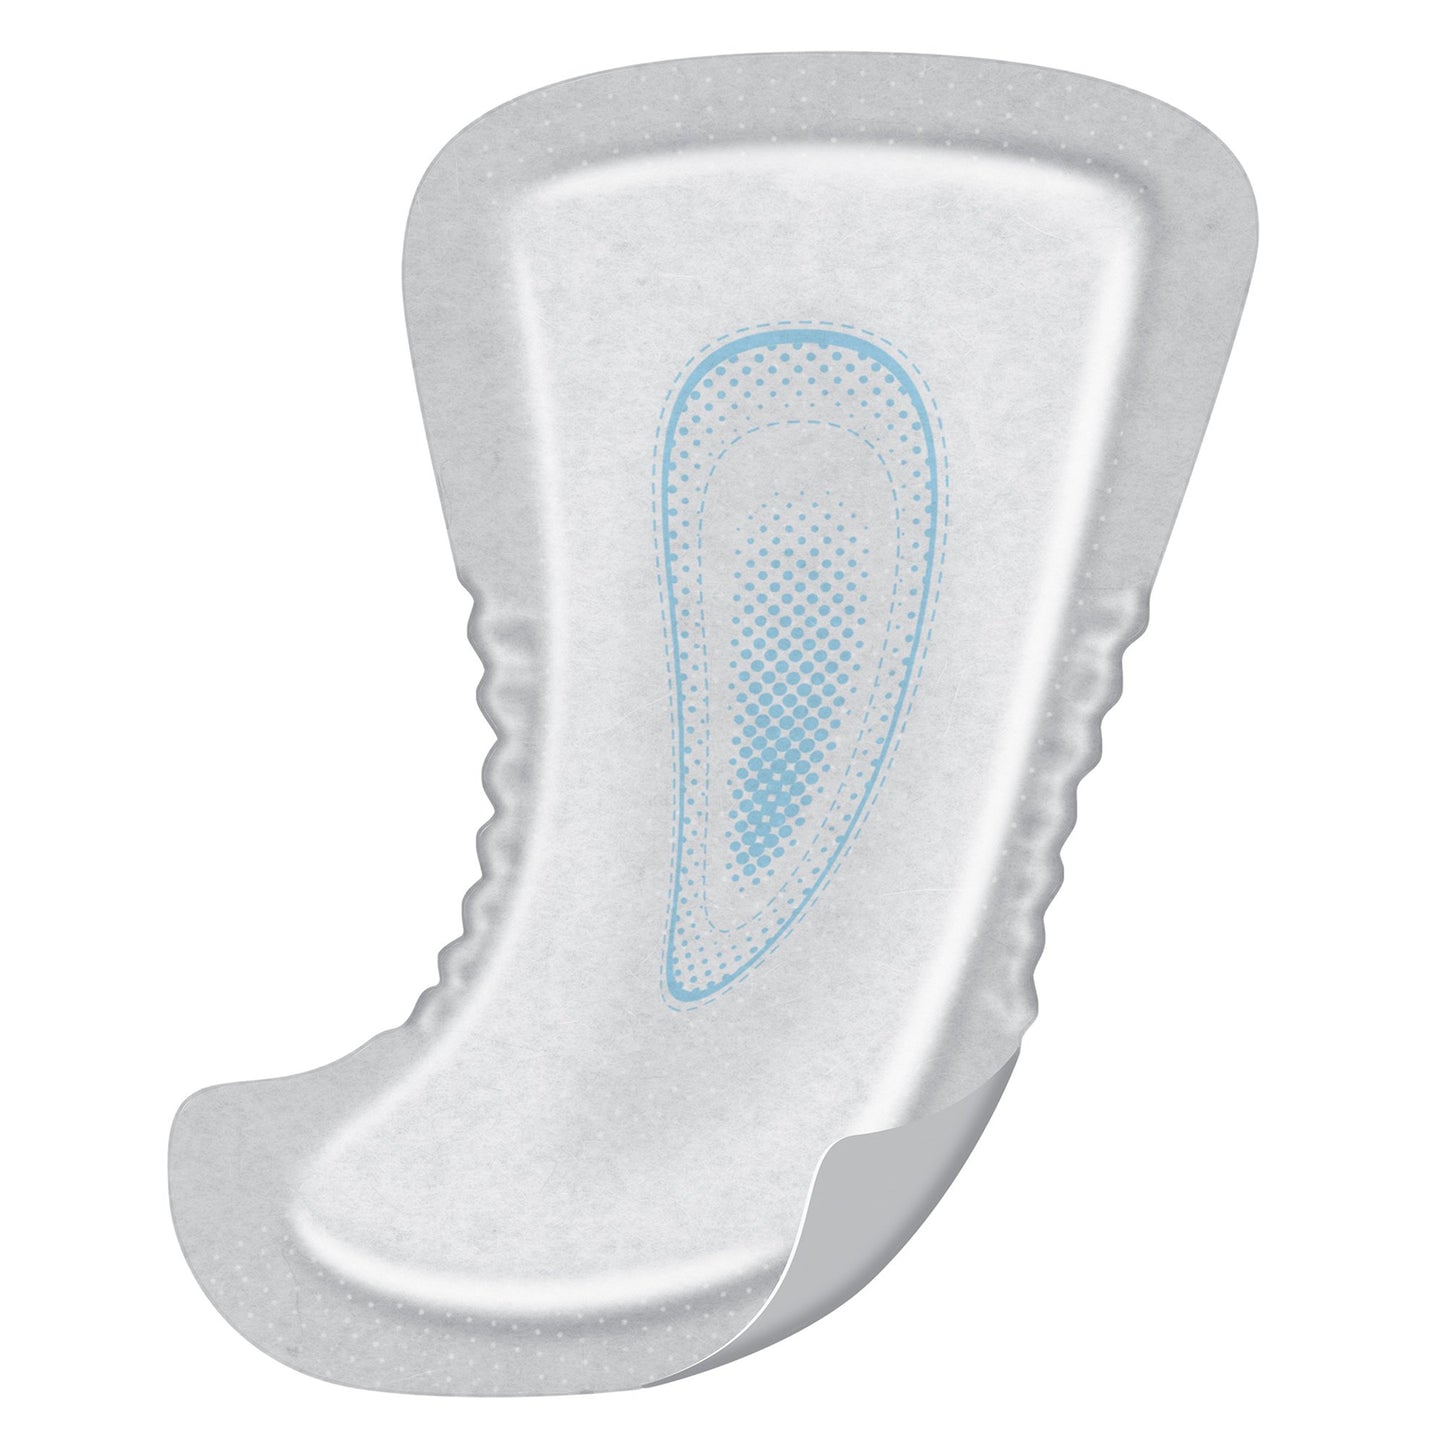 Prevail® Daily Male Guards Maximum Bladder Control Pad, 12.5" Length, 14 ct